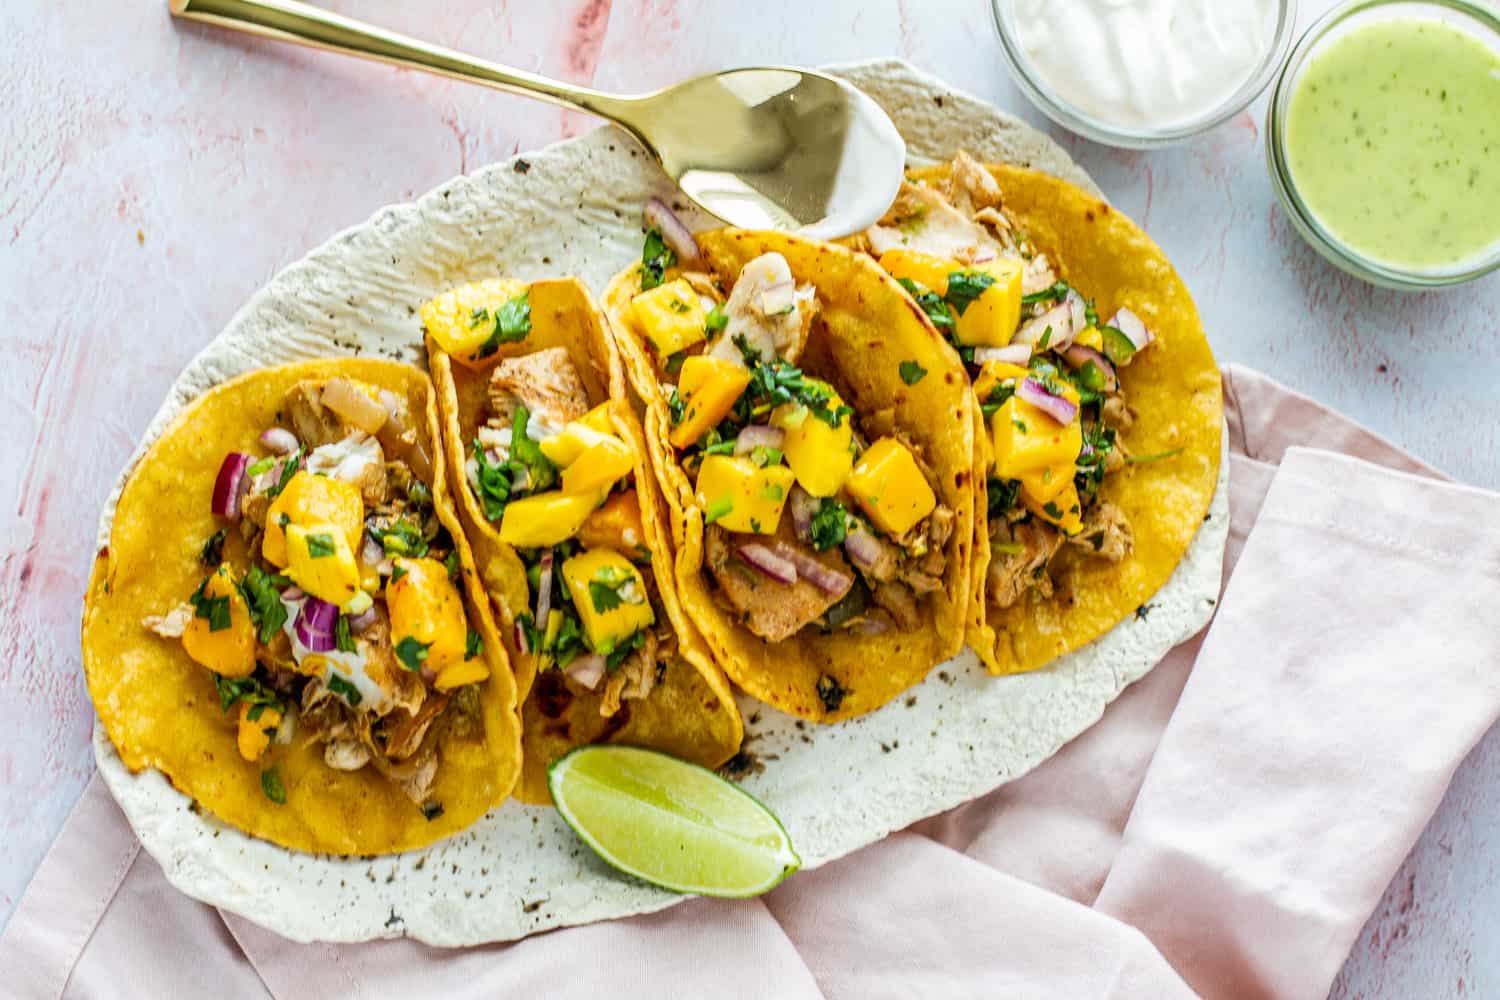 Spicy Citrus Fish Tacos with Mango Salsa | Meiko and The Dish